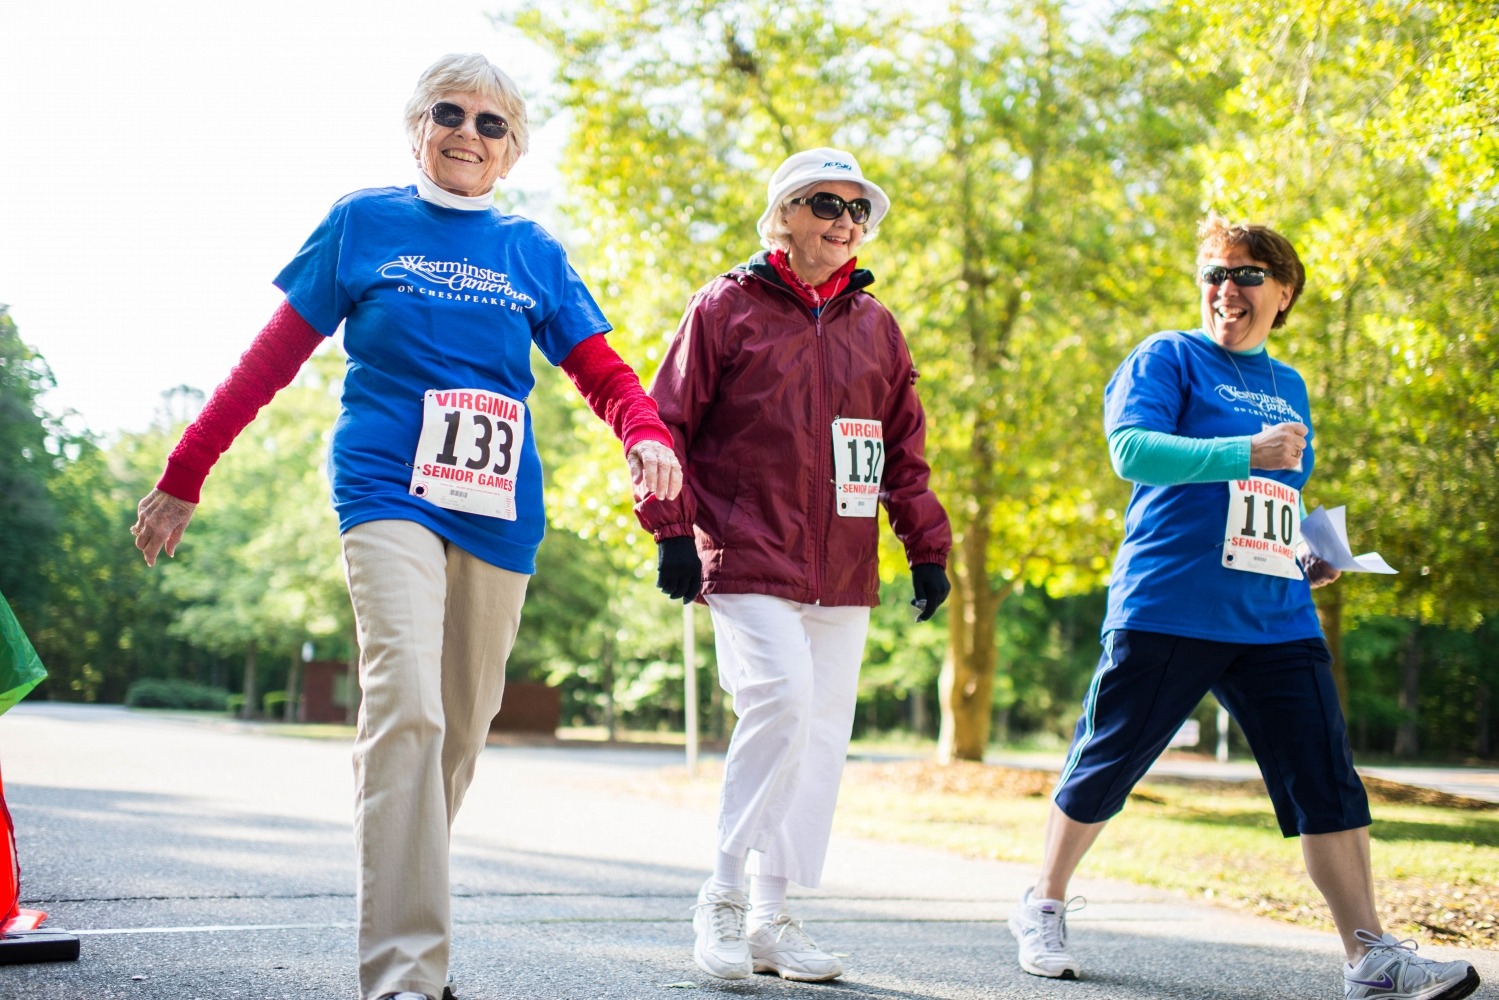 Retired Woman Participating in Walk